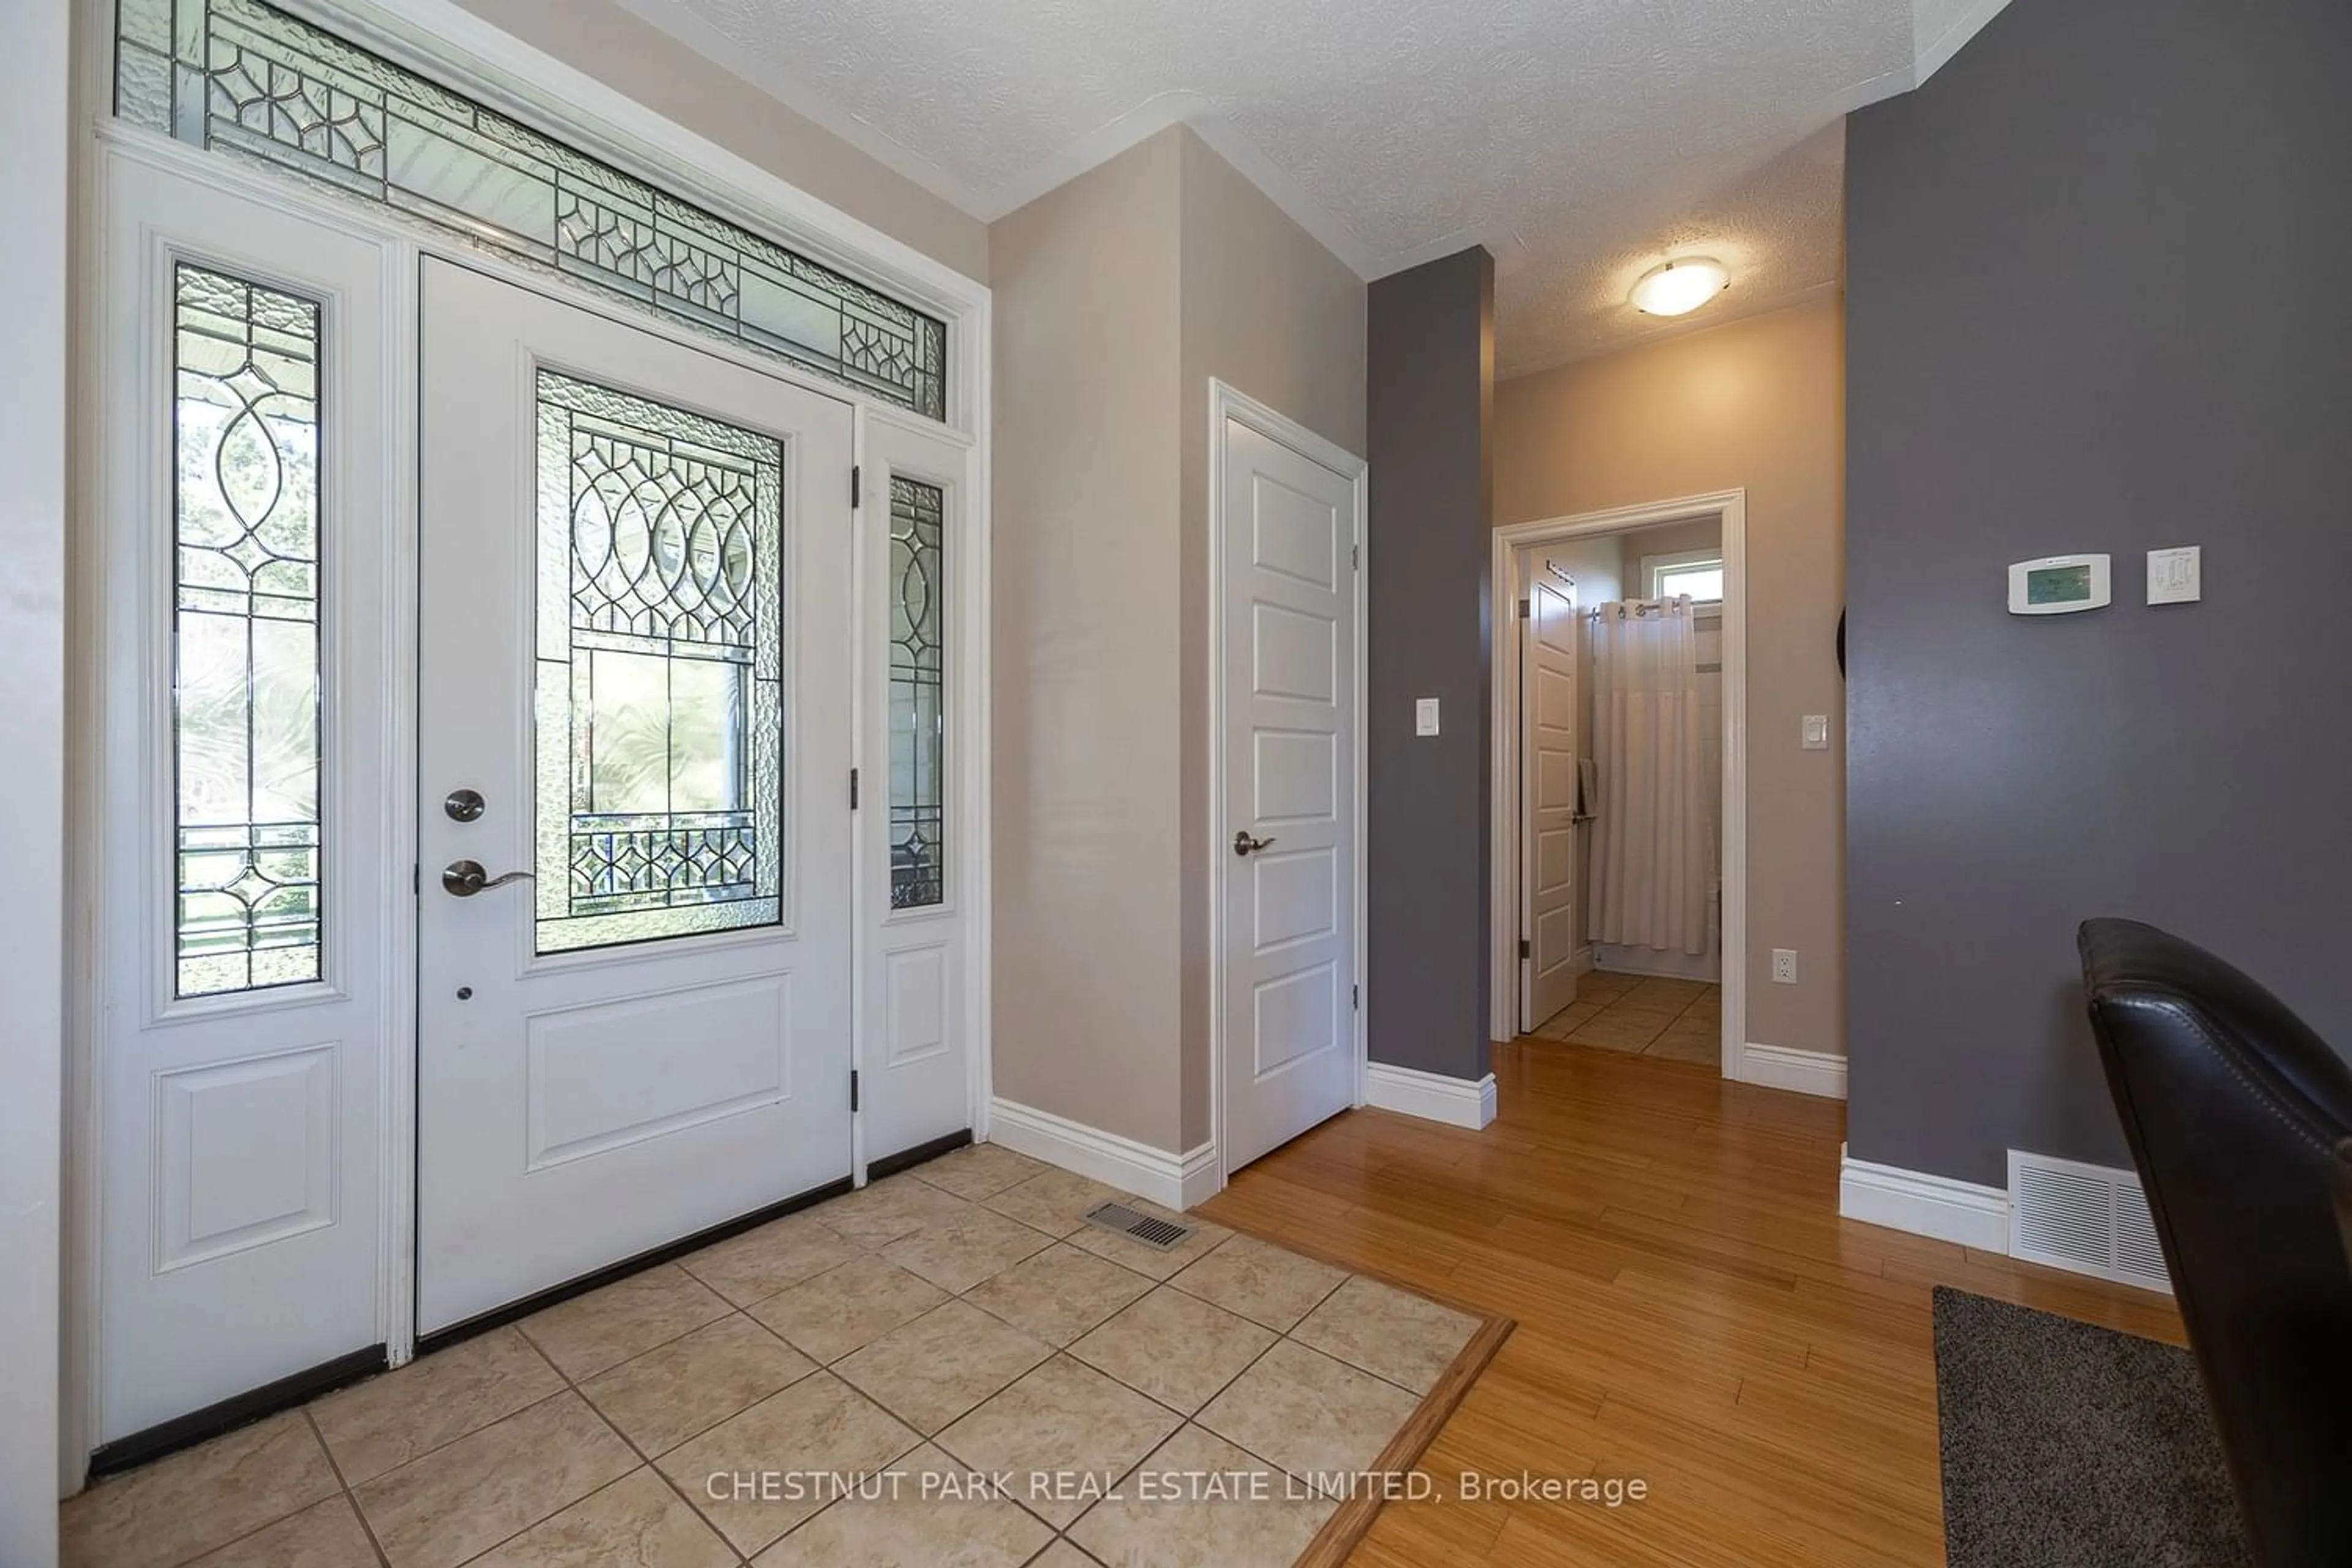 Indoor entryway for 084552 Sideroad 6, Meaford Ontario N0H 1E0